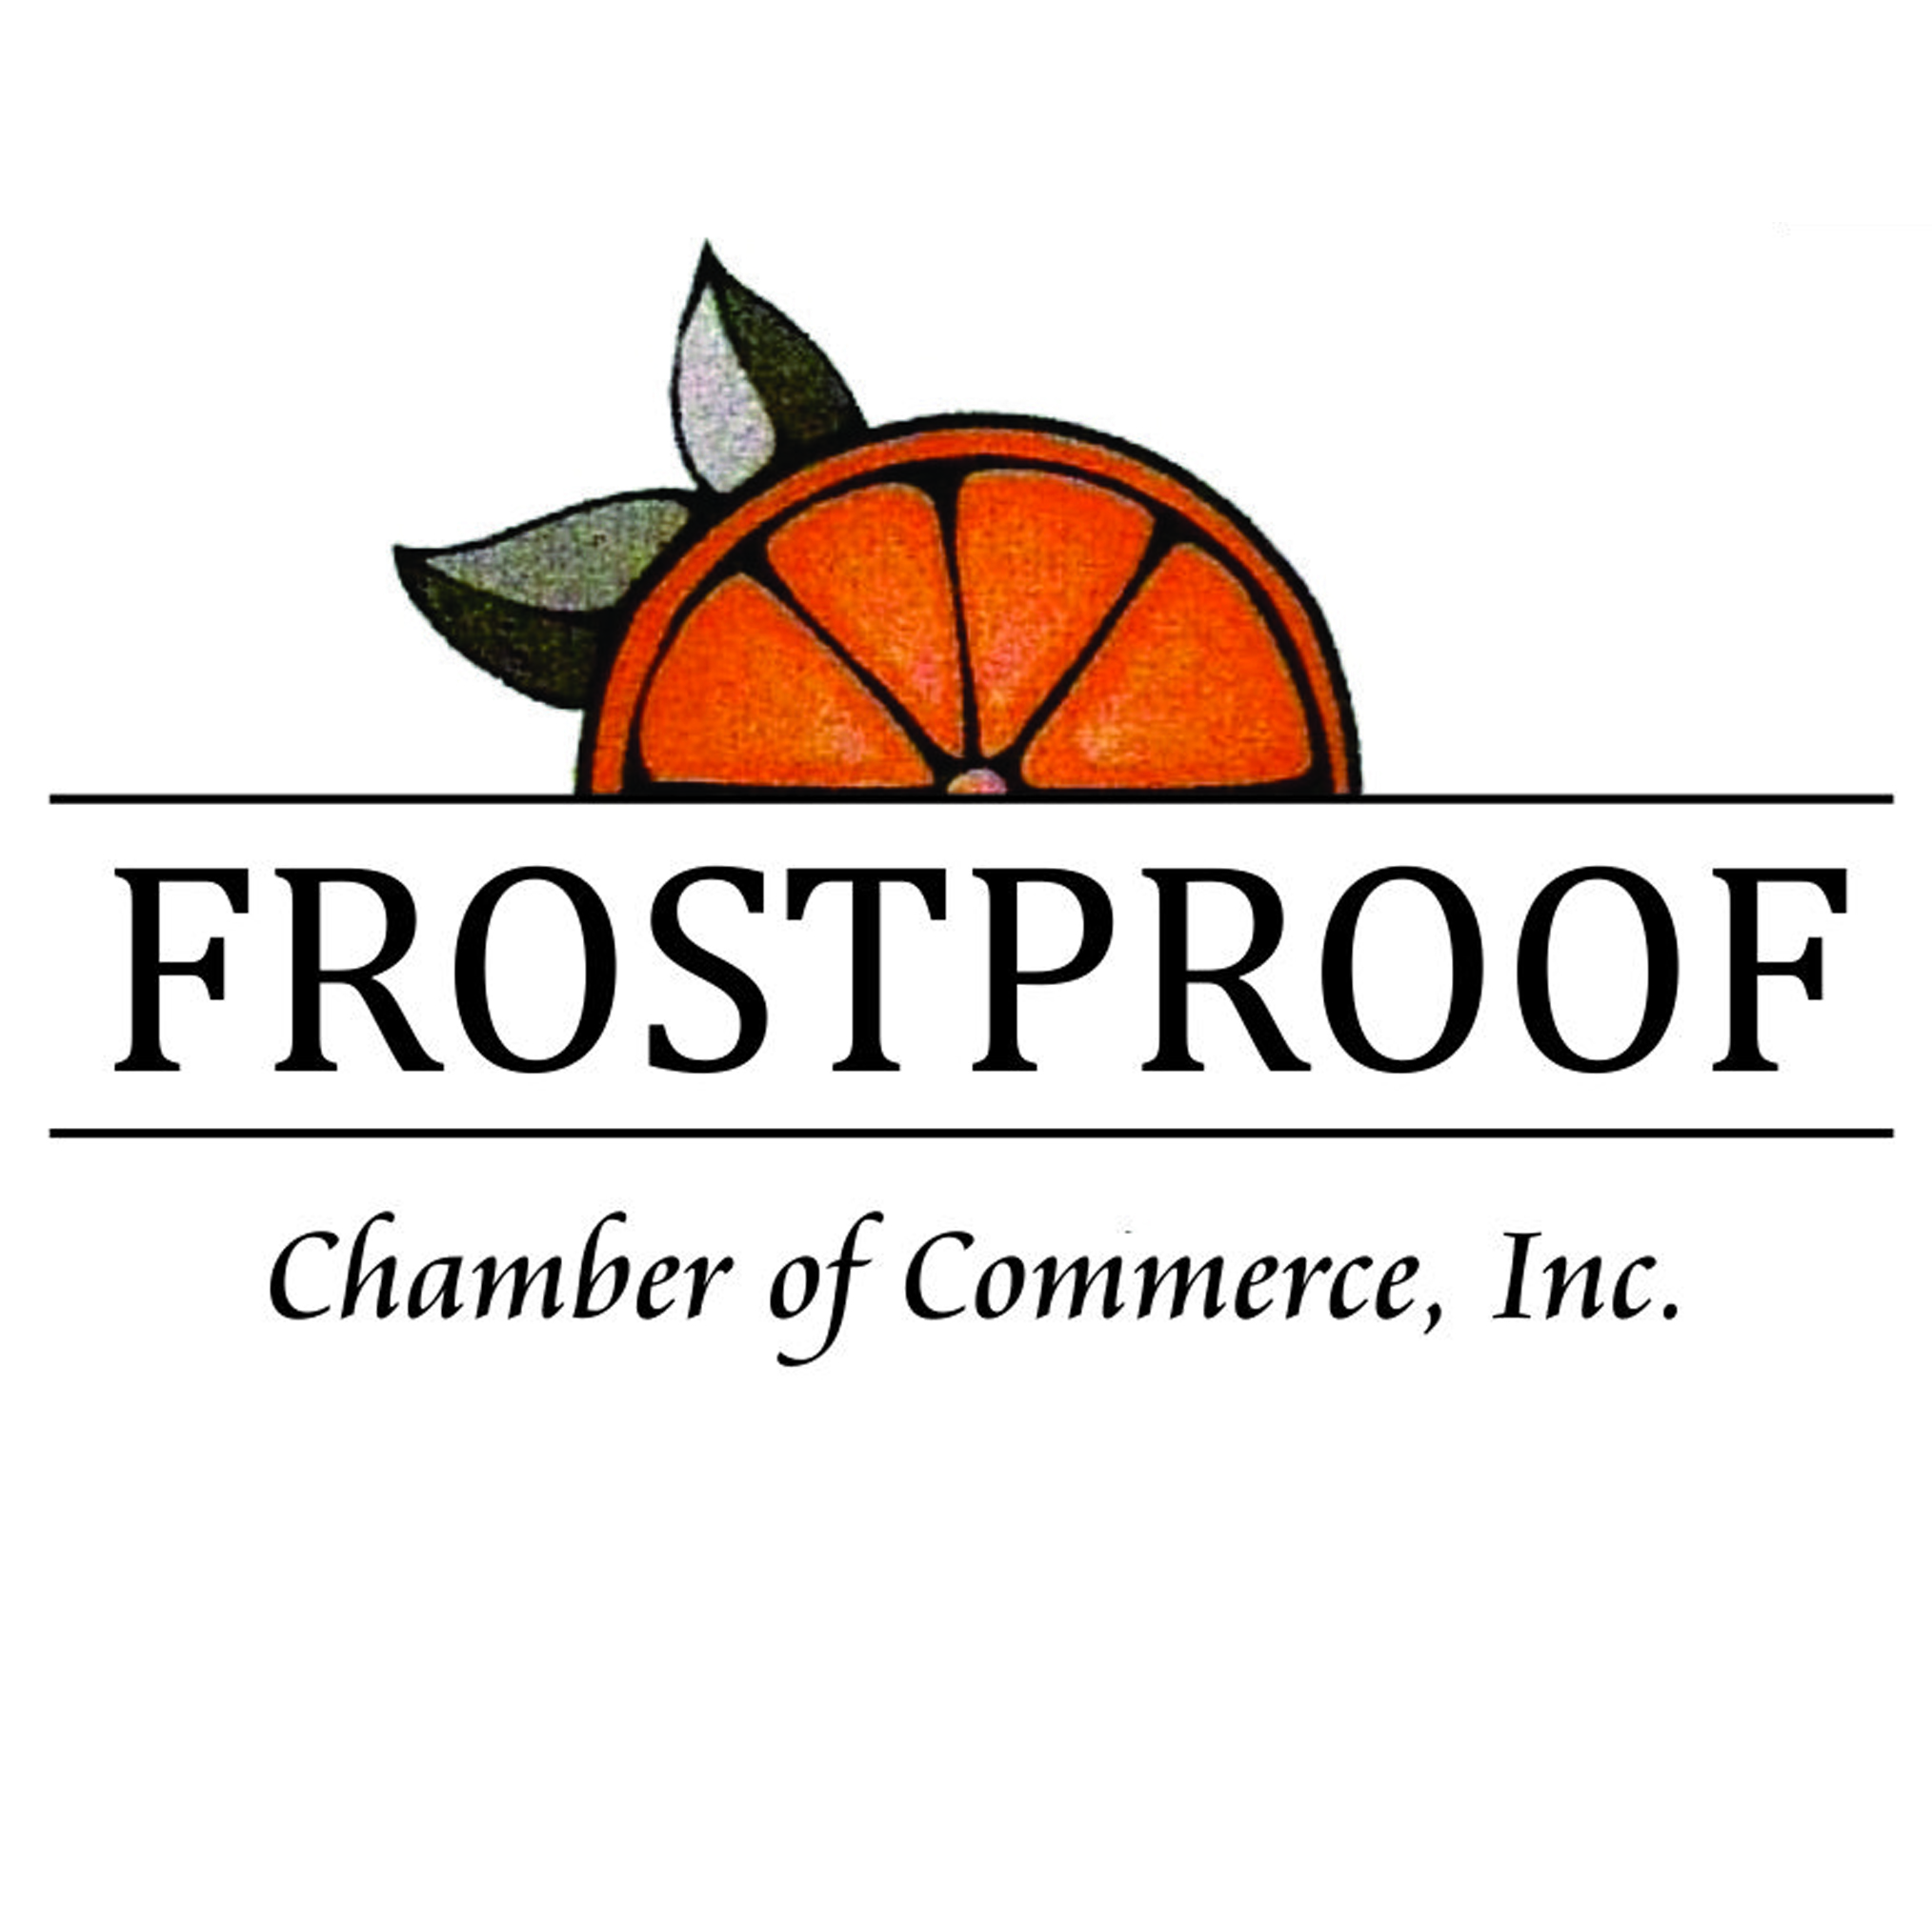 Frostproof Area Chamber of Commerce